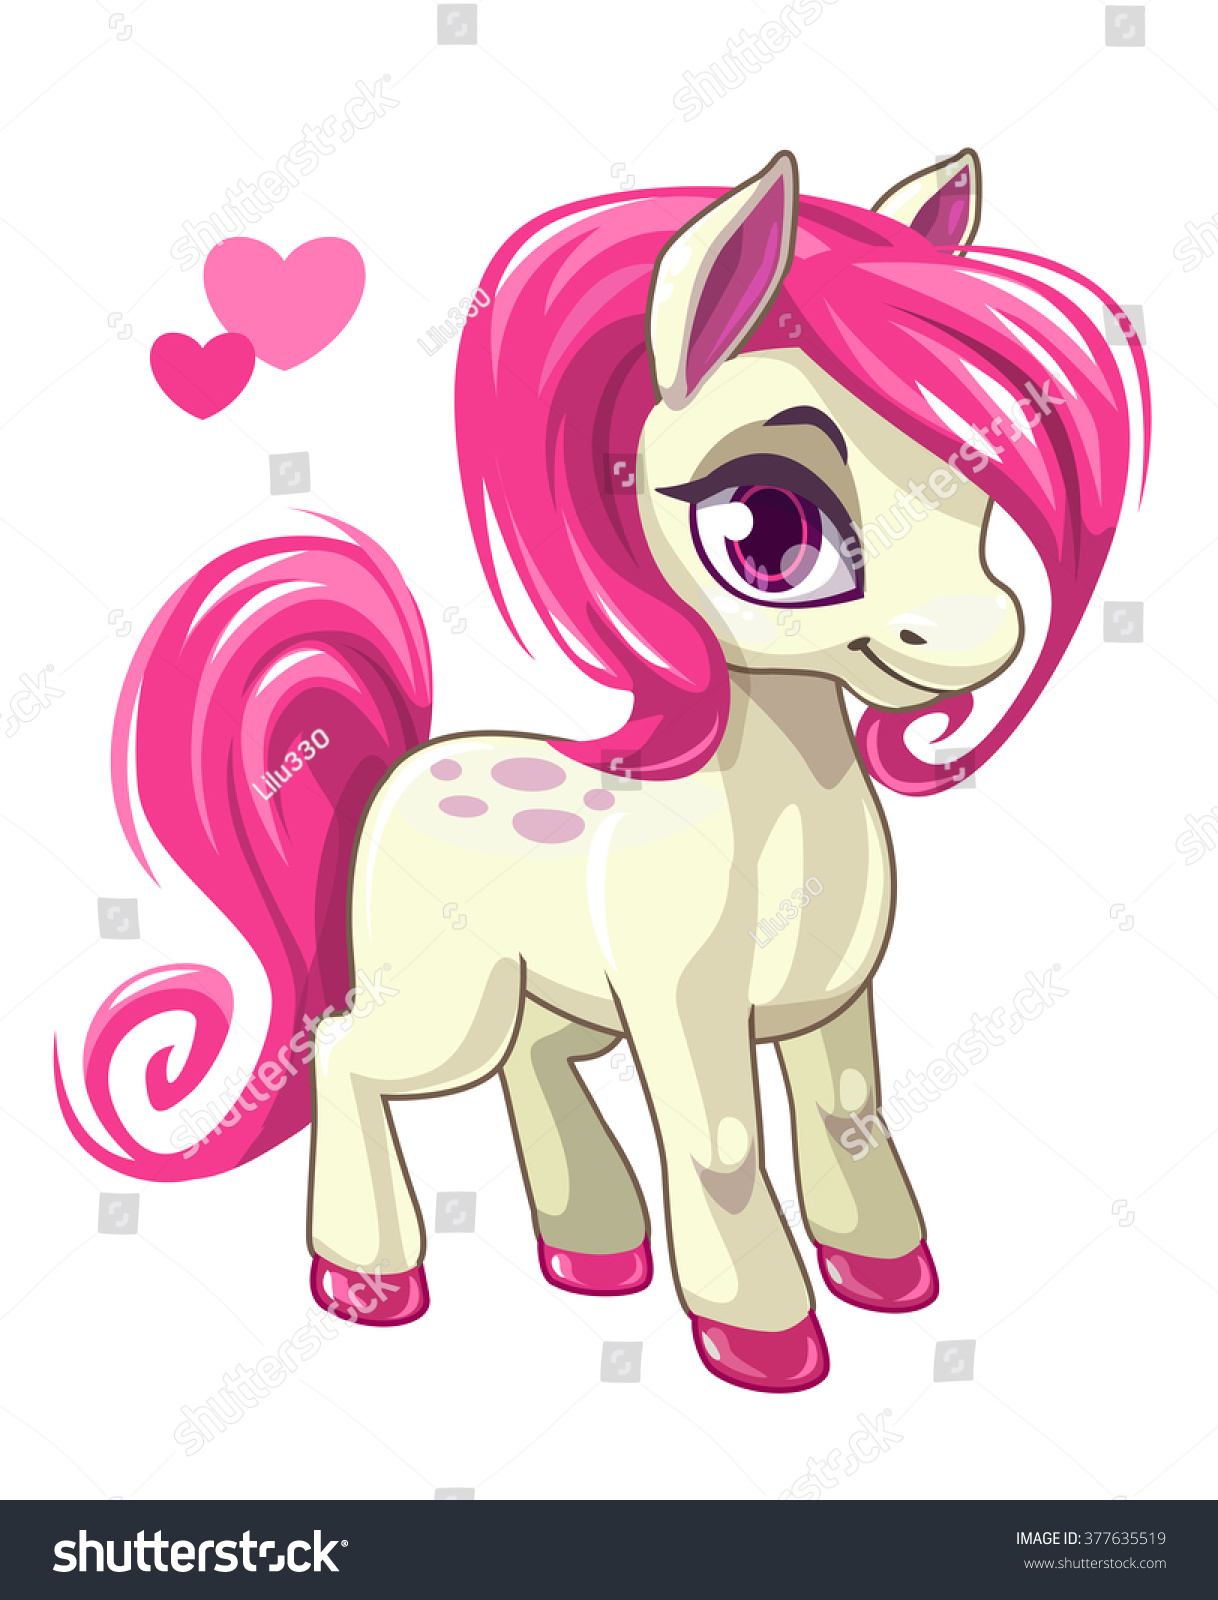 SVG of Cute cartoon little white baby horse with pink hair, beautiful pony princess character, vector illustration isolated on white svg